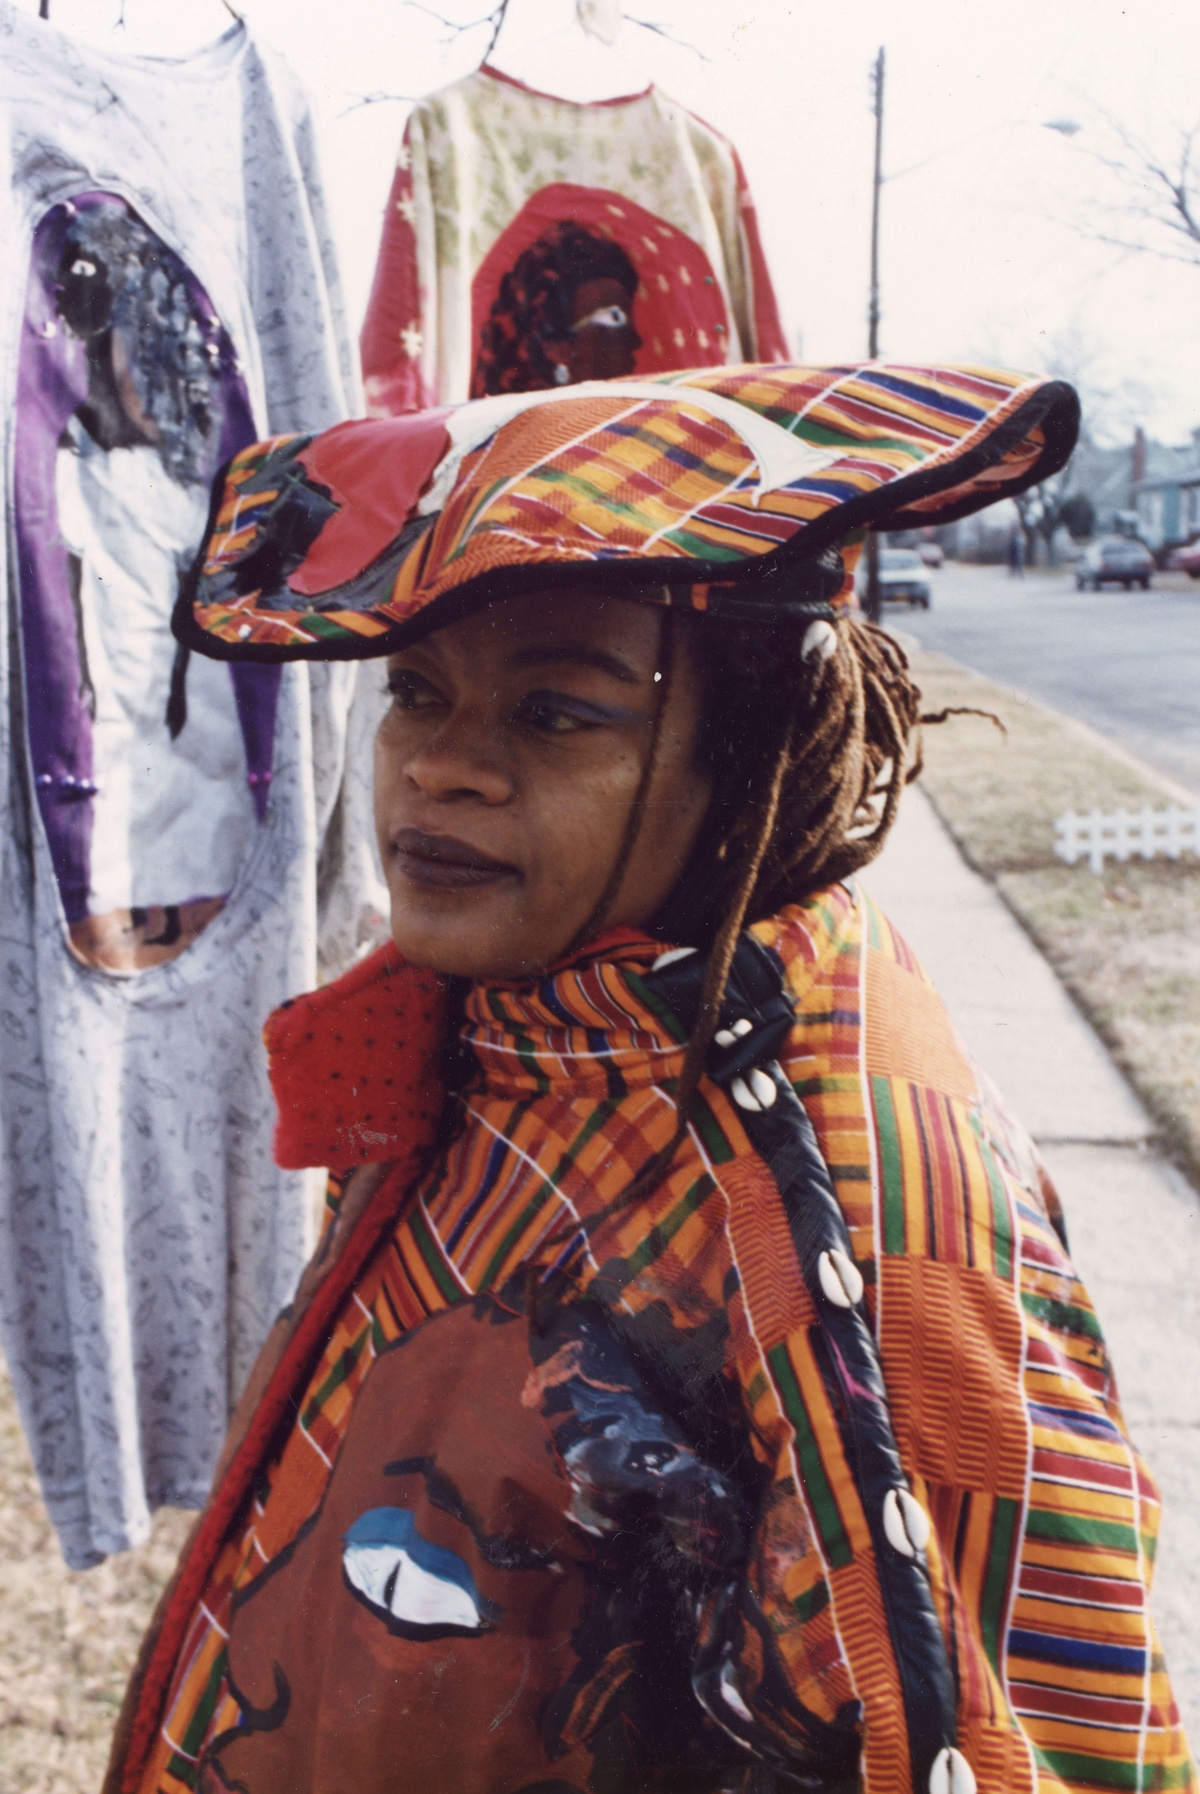 Dindga McCannon wearing her own designs. She has on a orange patterned hat and jacket.